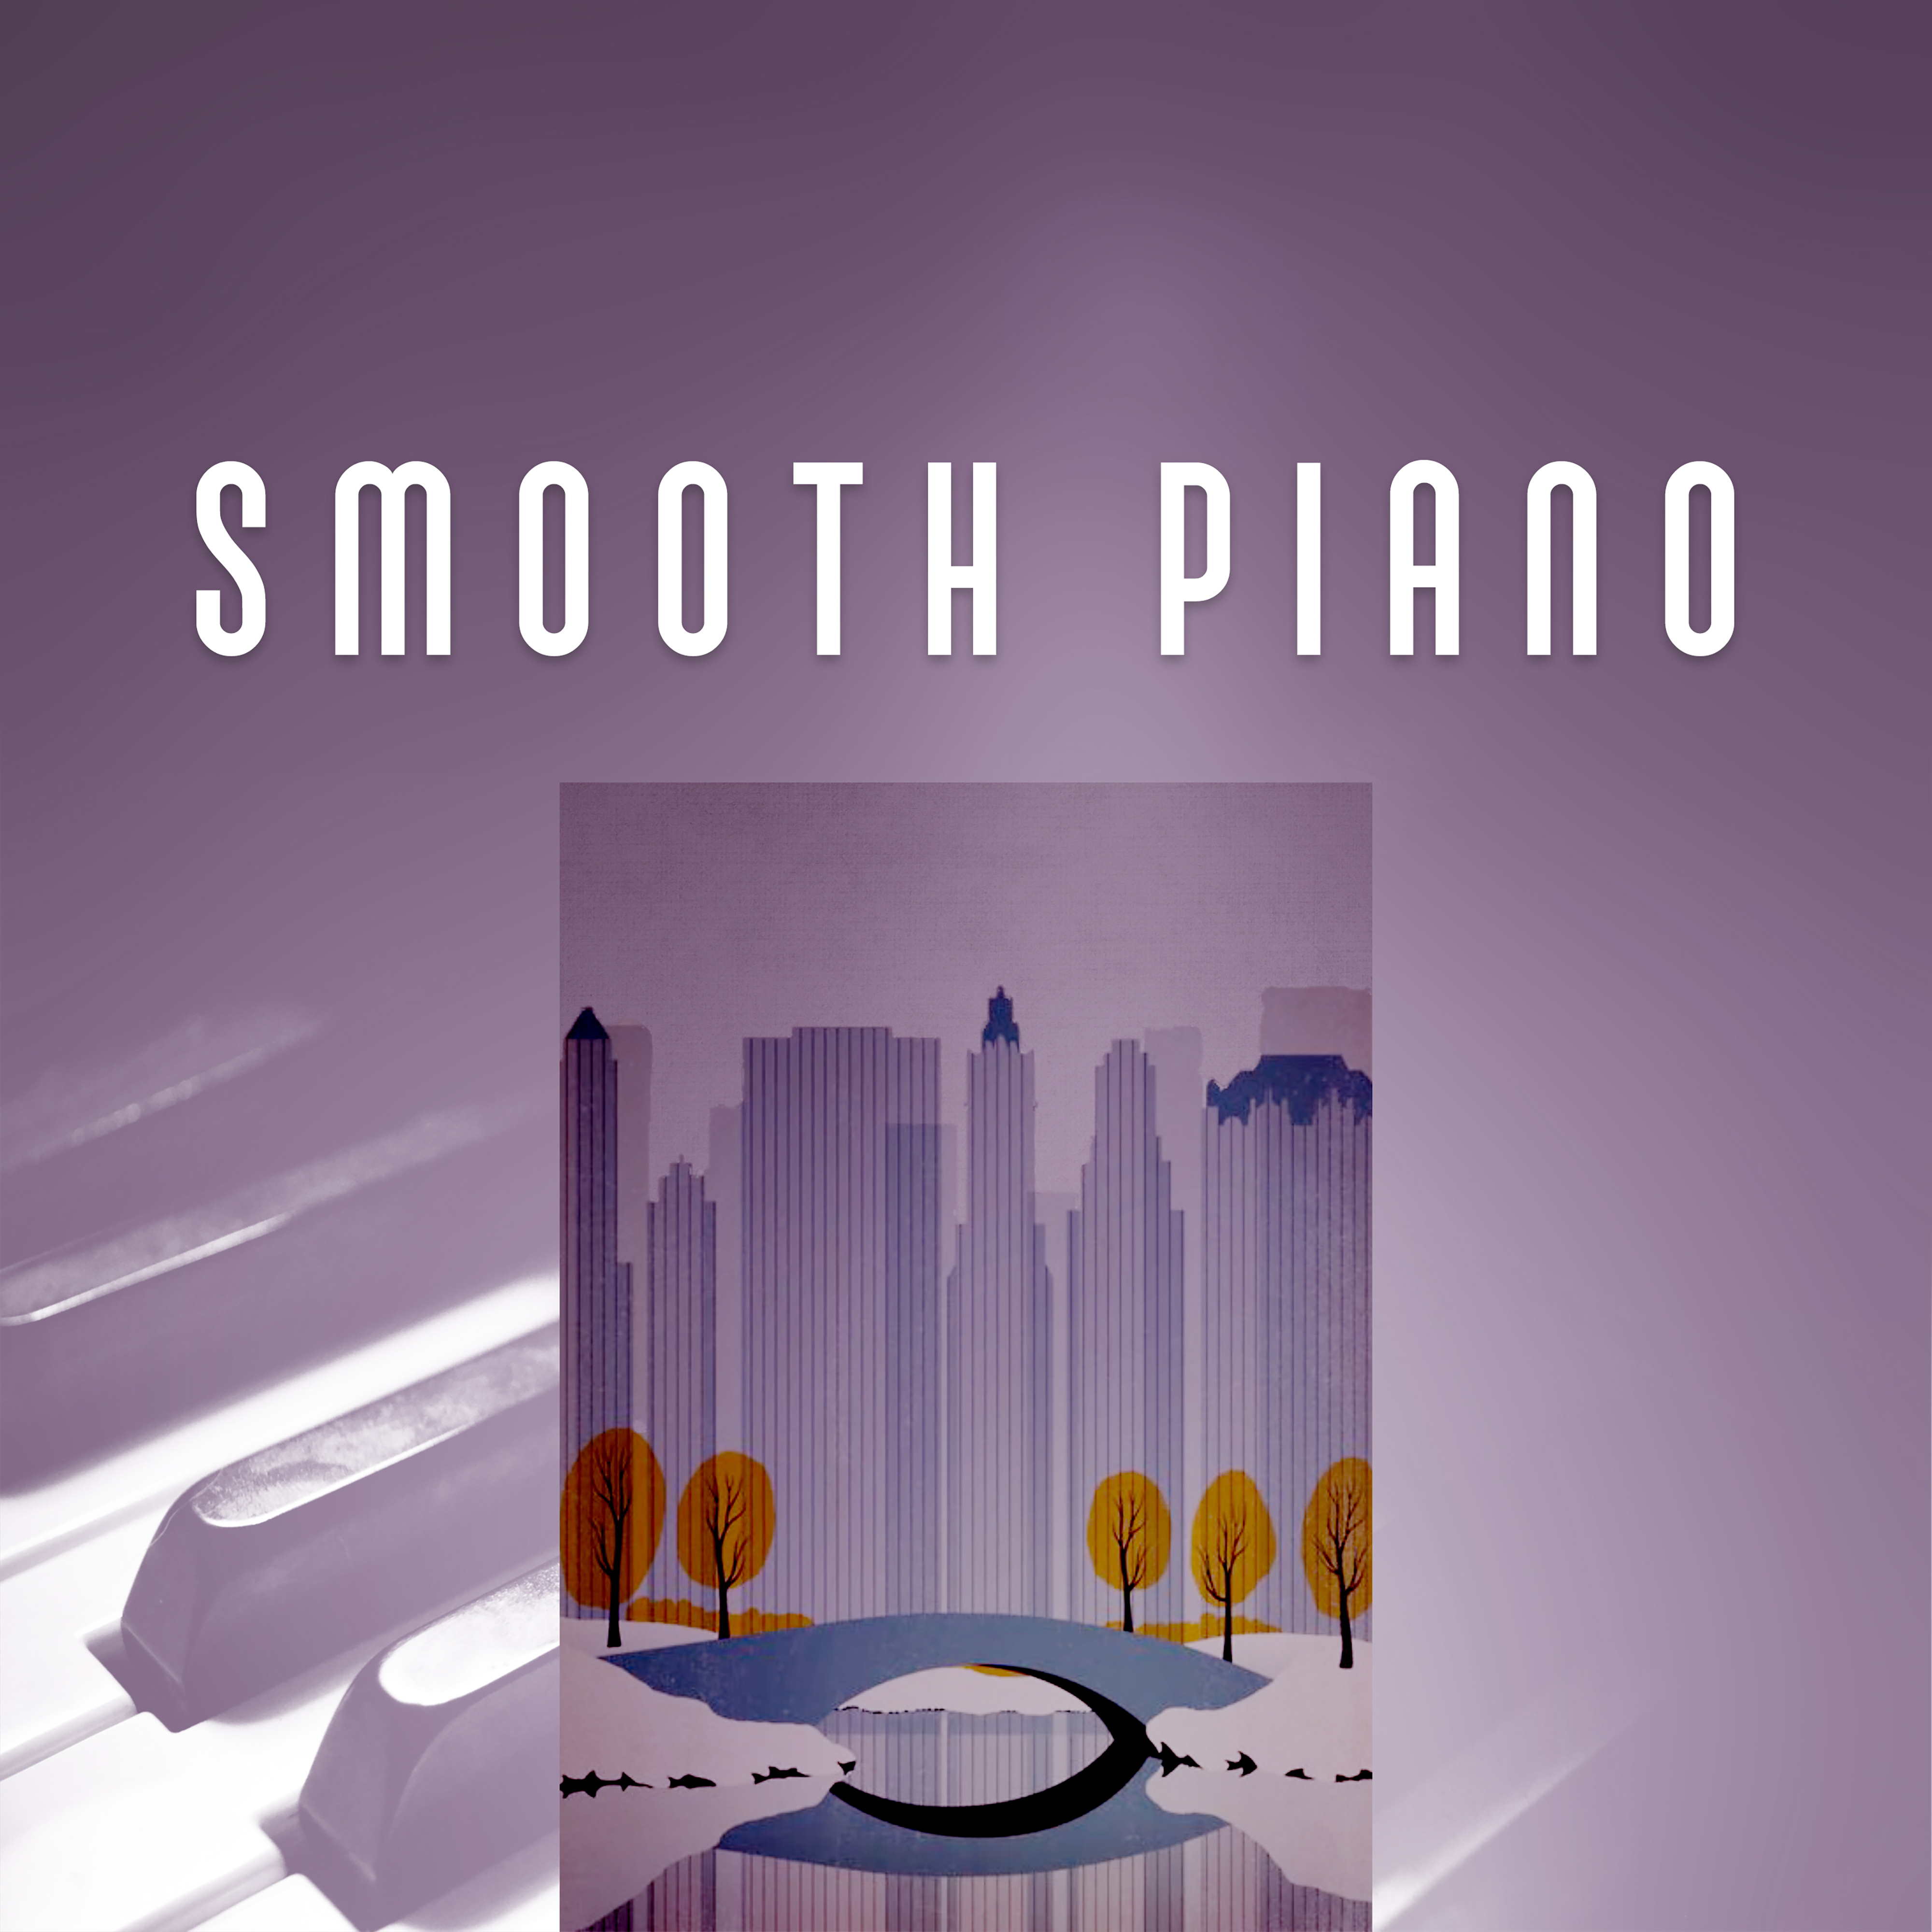 Smooth Piano – Mellow Jazz Instrumental, Ambient Piano Sounds, Long Winter Evenings